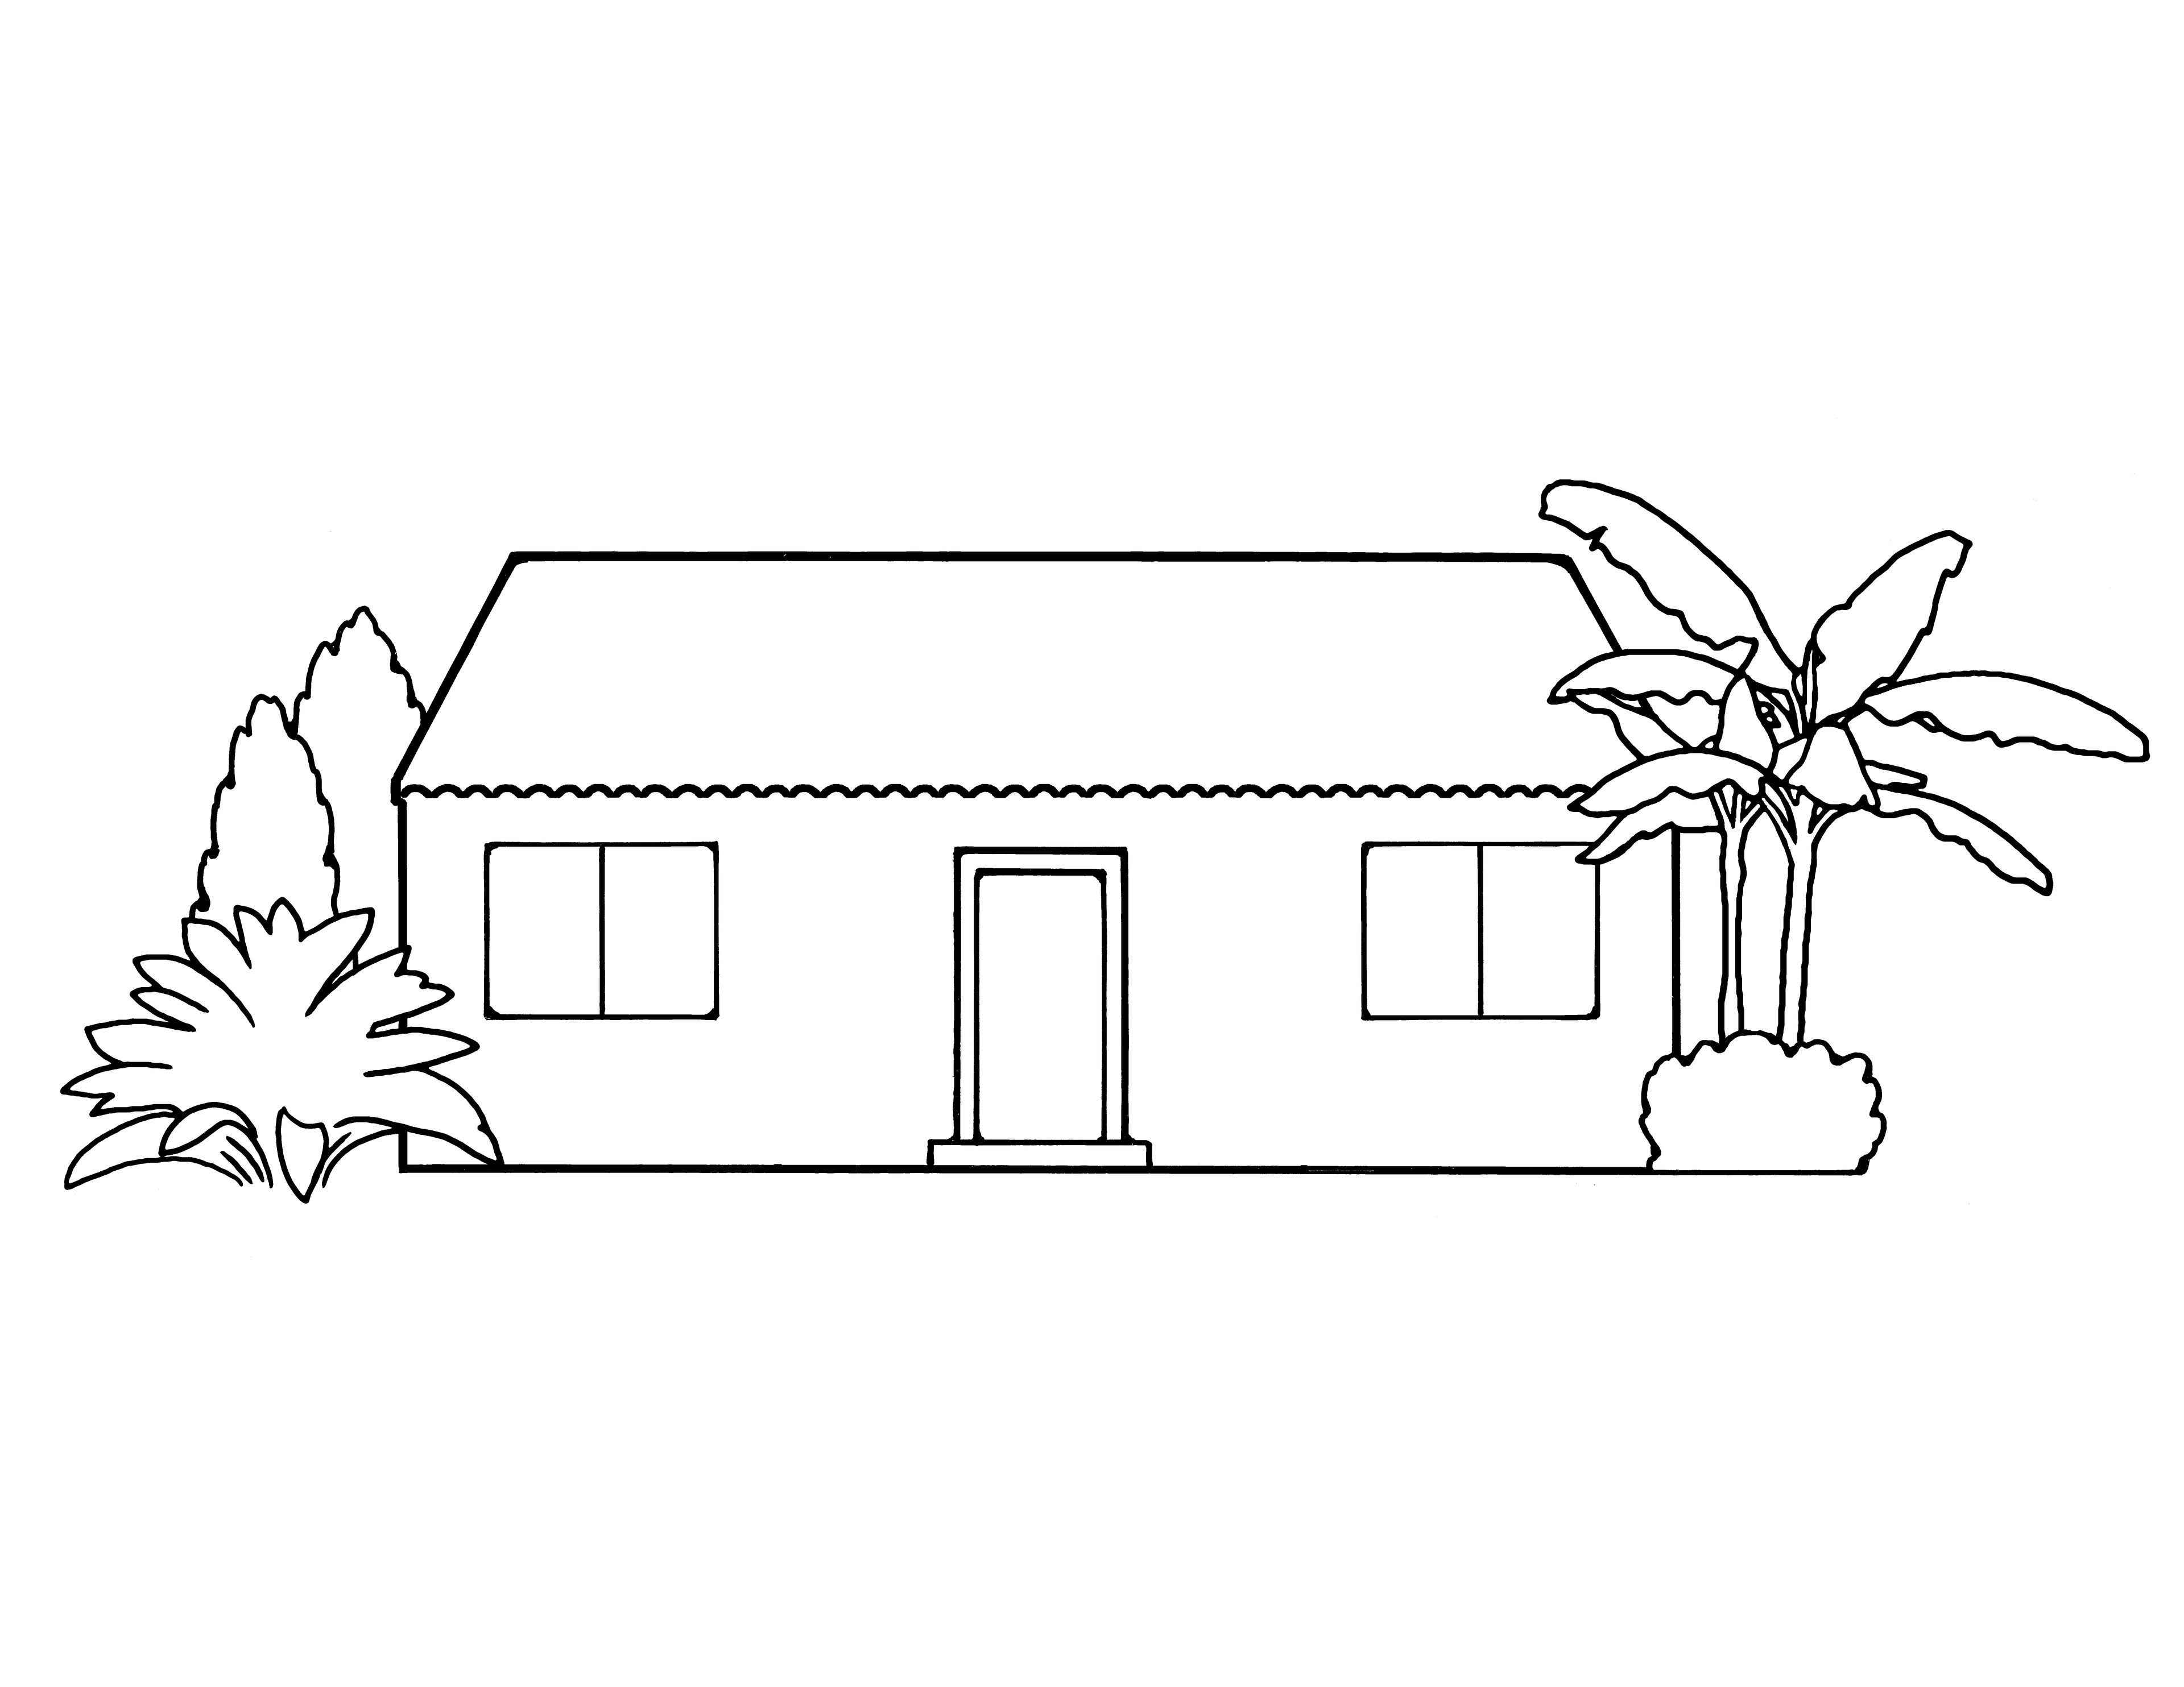 An illustration of a house from the nursery manual Behold Your Little Ones (2008), pages 55 and 67.